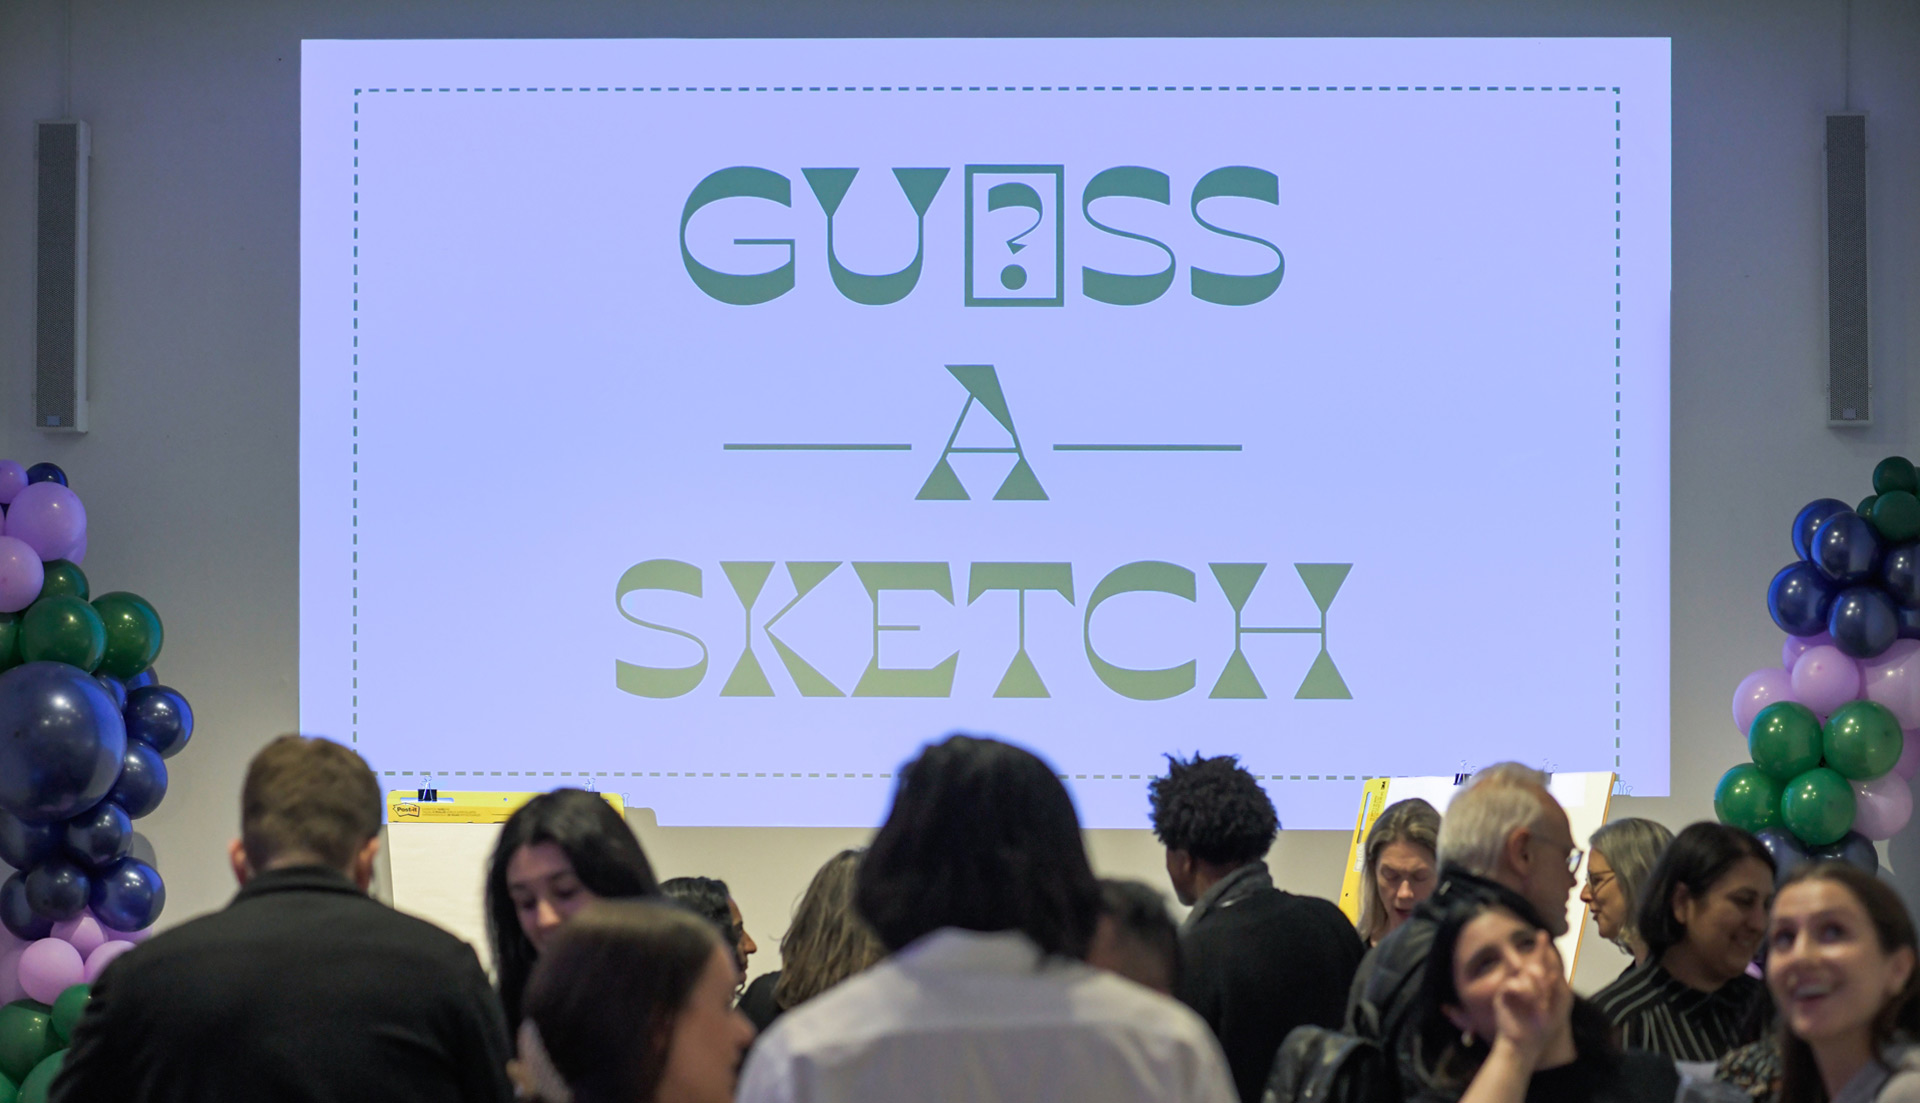 Guess-A-Sketch logo slide projected behind the event.